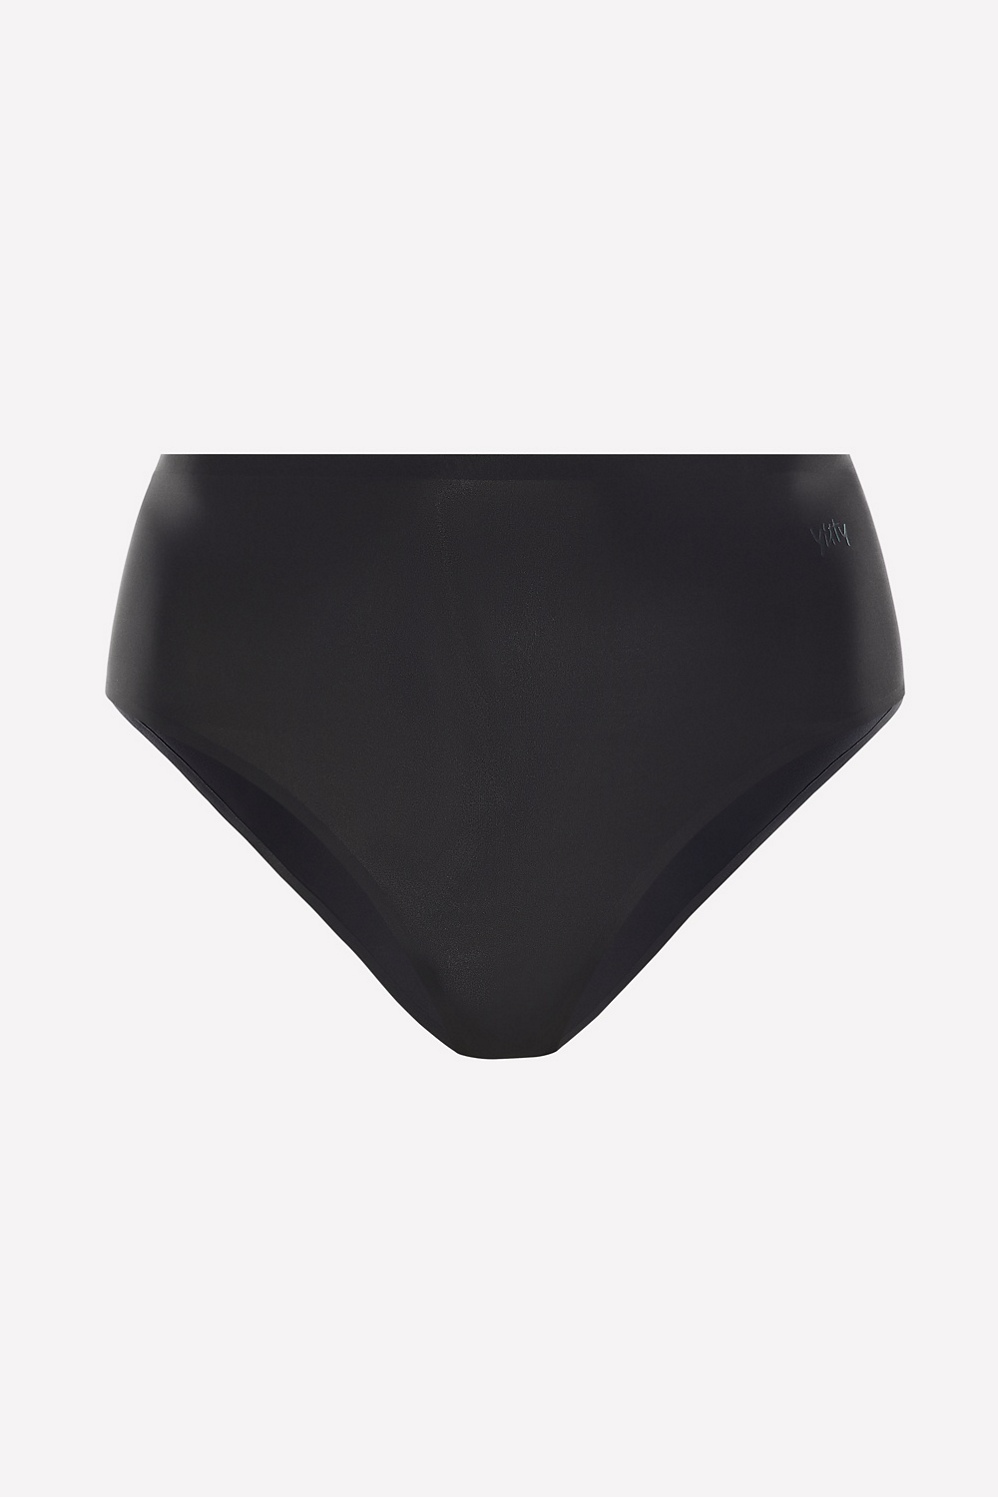 Smoothed Reality High Waist Brief - Yitty